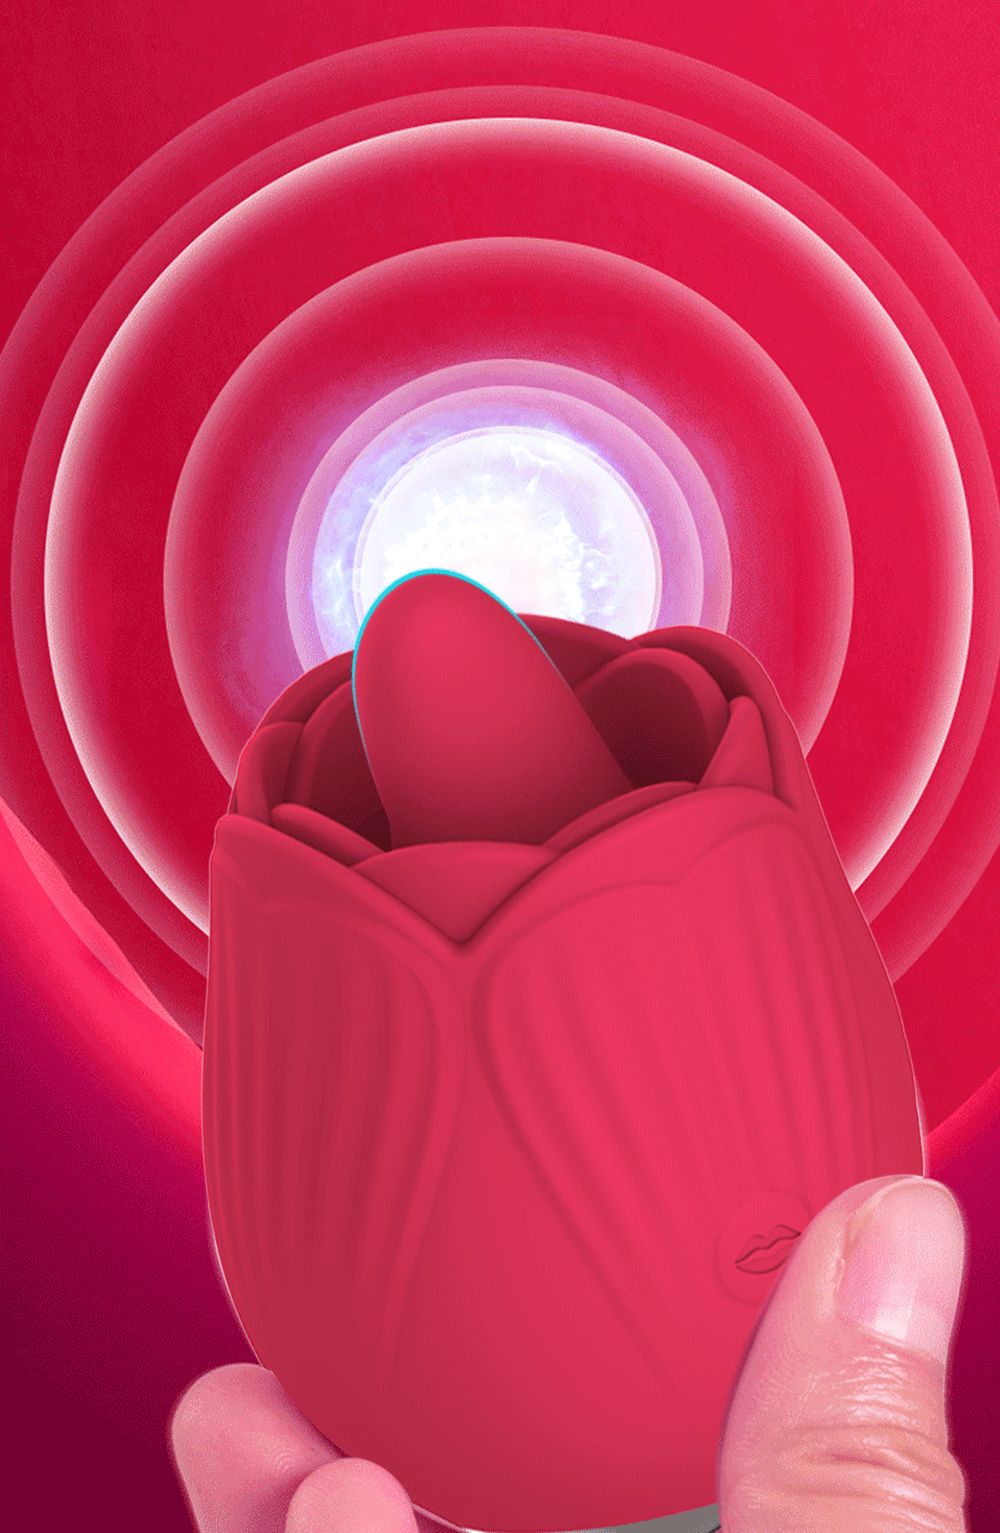 Rose Toy Vibrator for Women with Tongue Licking showing